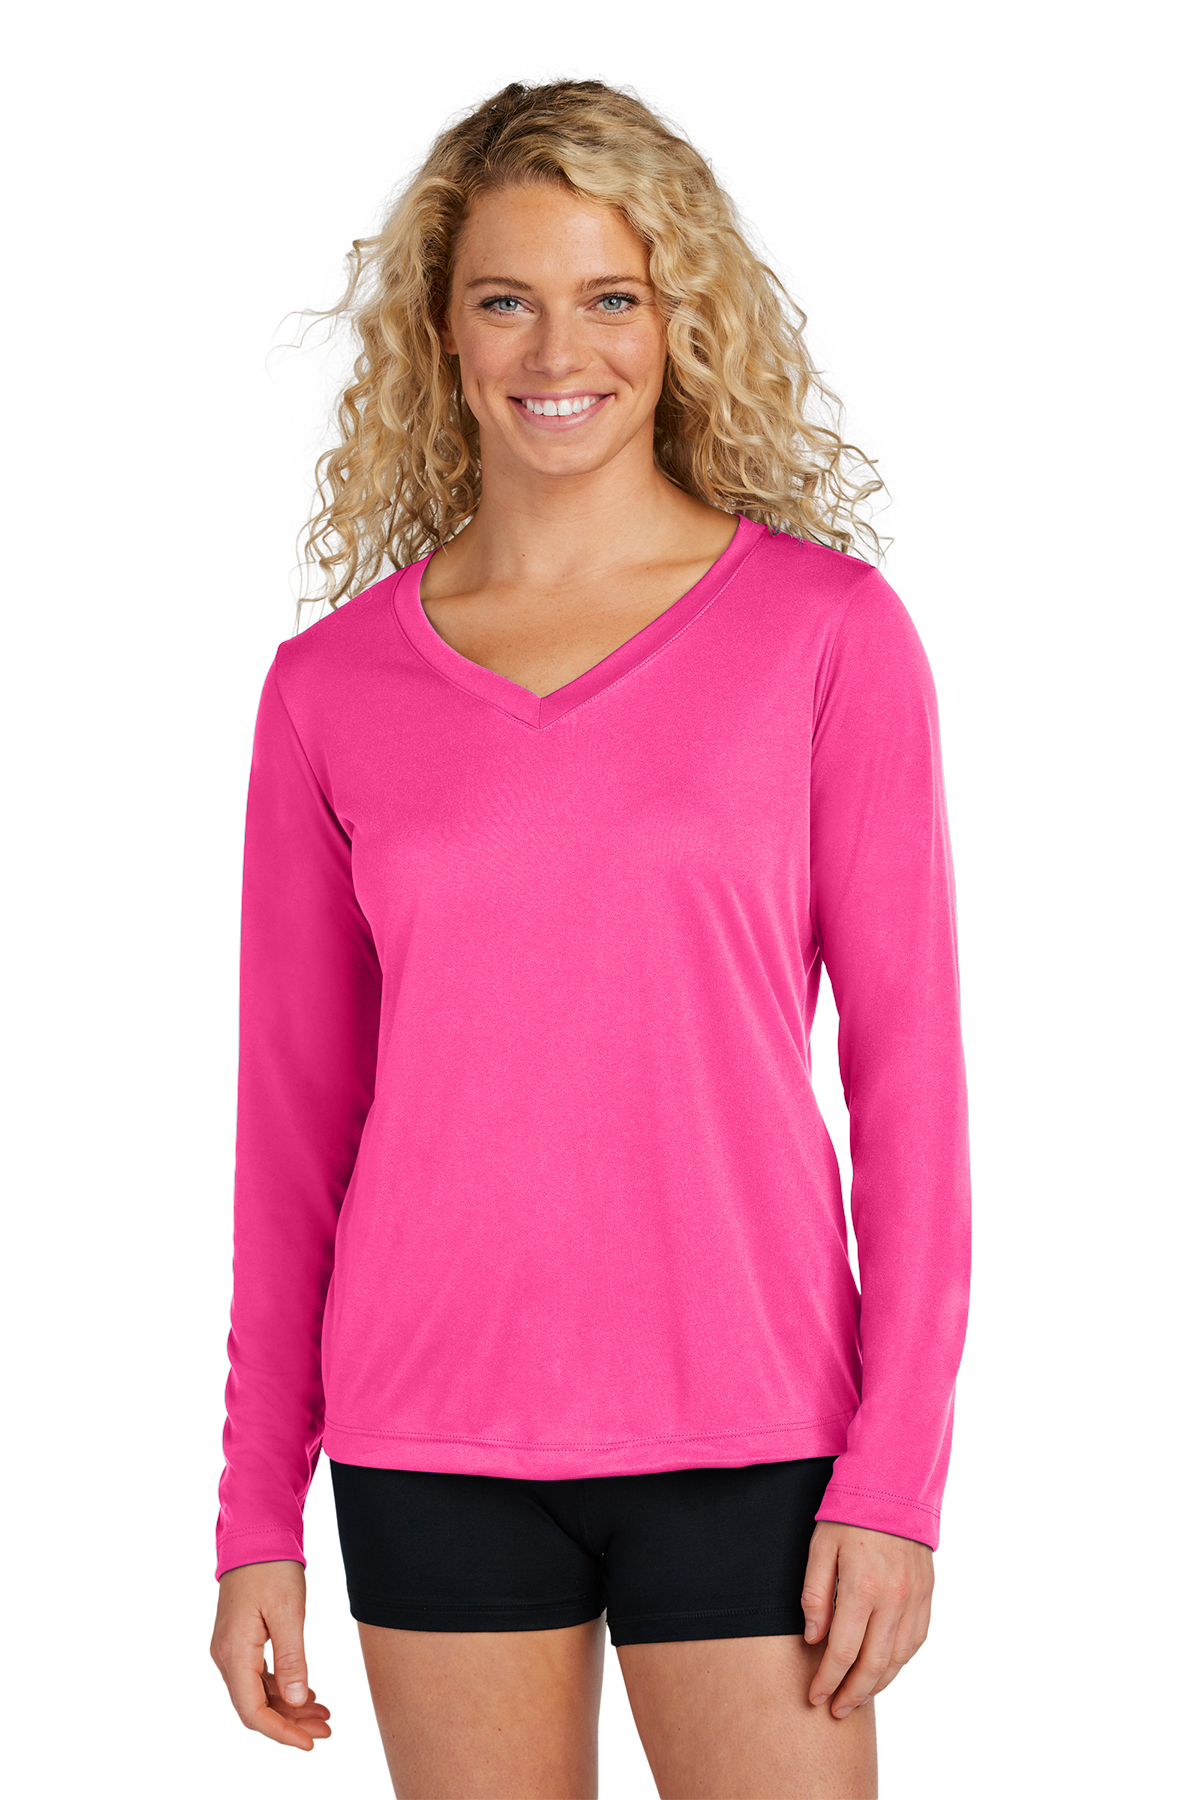 The Oversized Neon Sports T-shirt l RectoVerso sportswear for women -  RectoVerso Sports